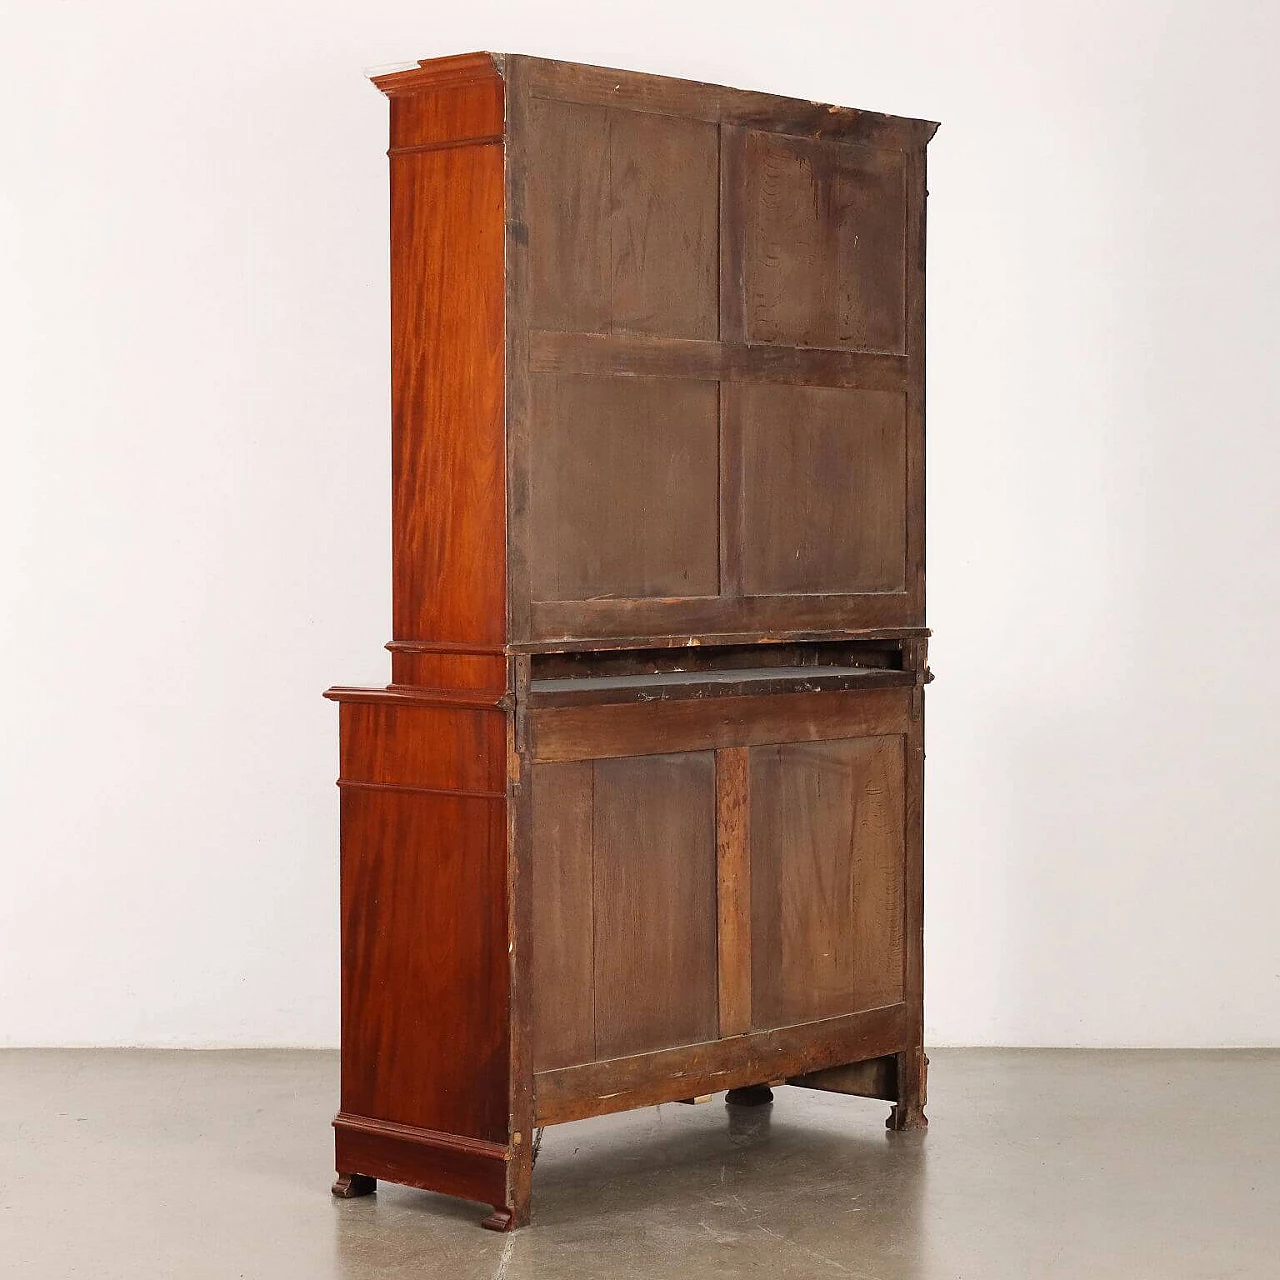 Mahogany bookcase with two glass doors and drawers, late 19th century 10